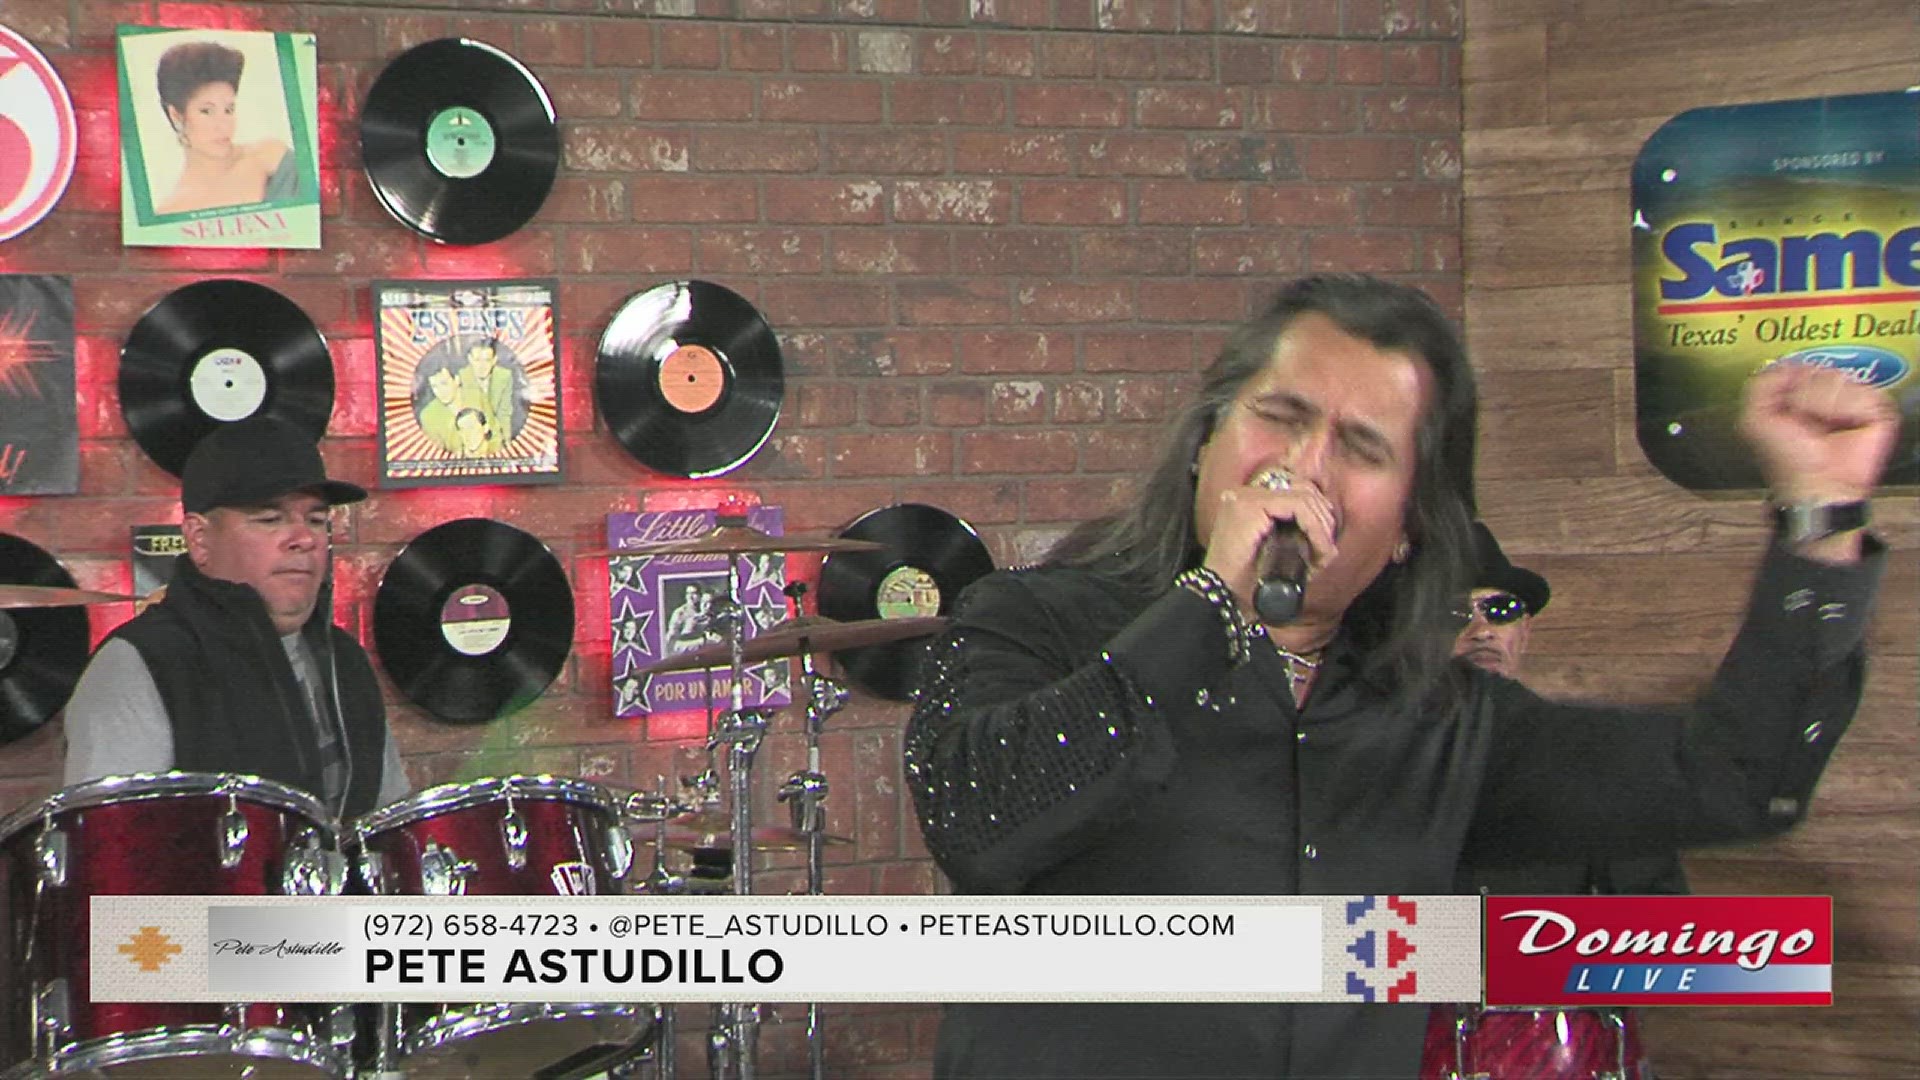 Pete Astudillo and his band joined us on Domingo Live to perform his song "Perdóname."